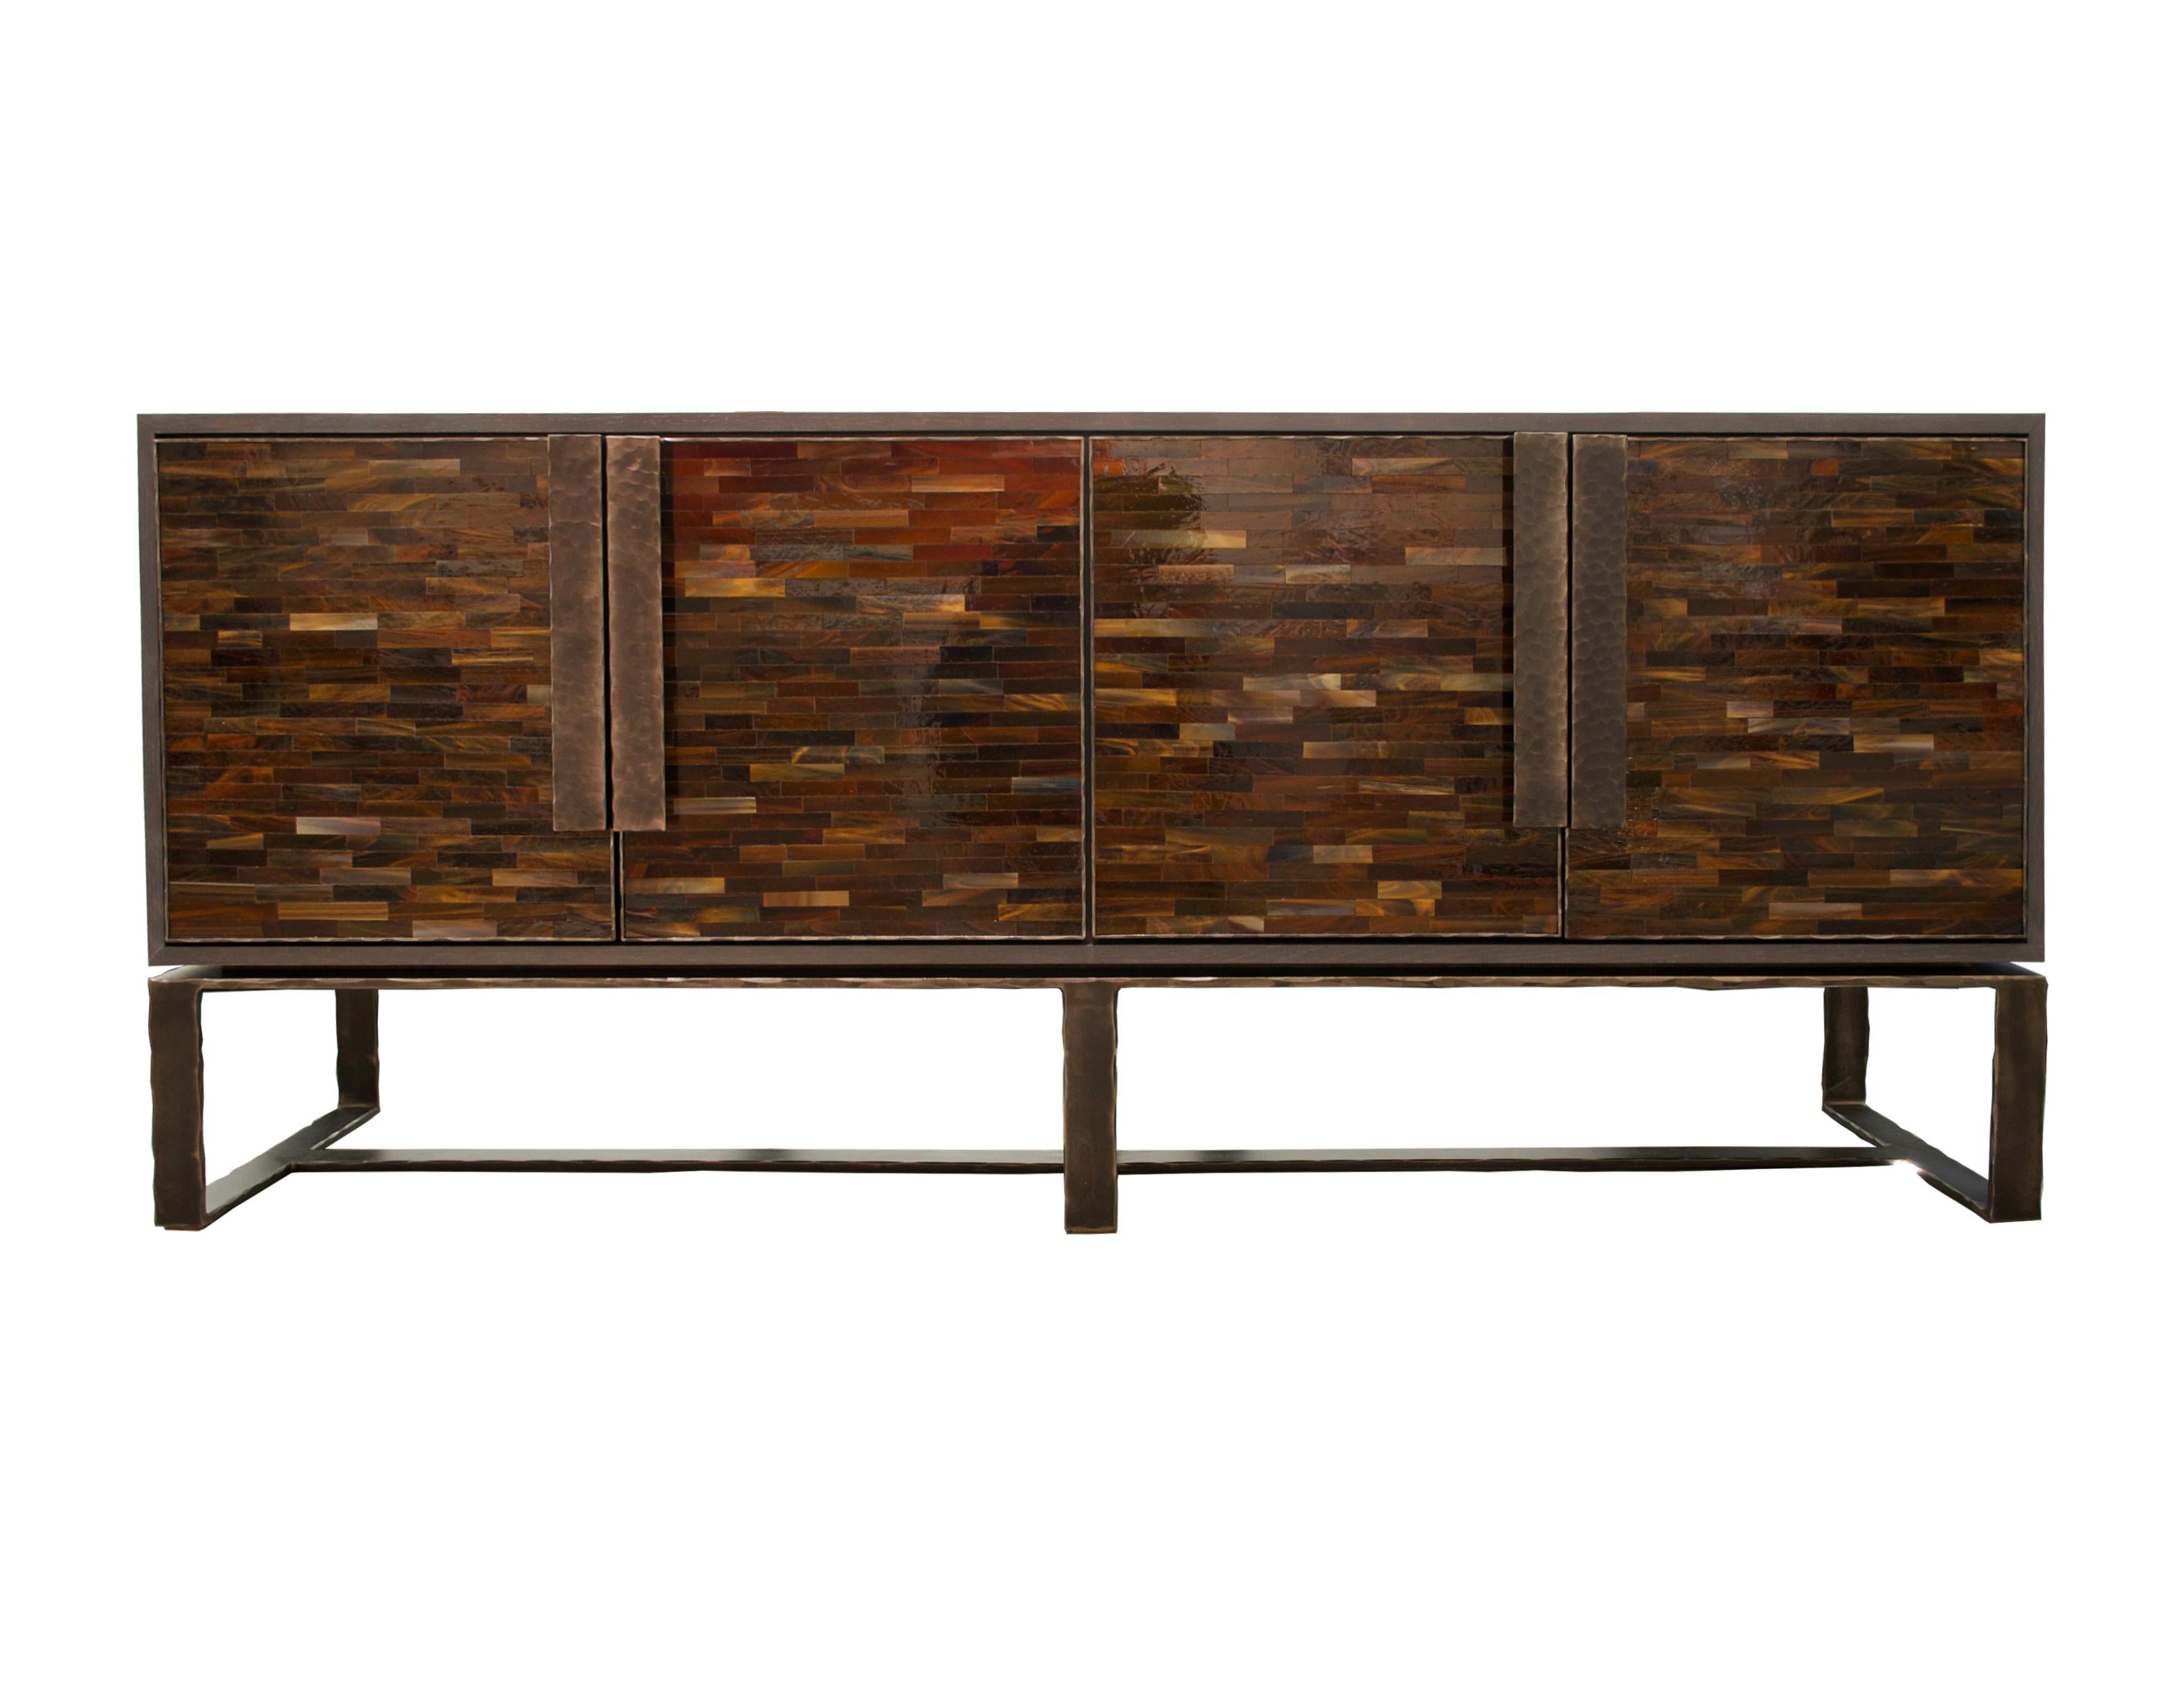 The Chelsea credenza or sideboard by Ercole Home has a 2-door front, with Espresso wood finish on oak.
Handcut glass mosaics in medium and dark chocolate decorate the surface in Luis pattern.
Hand-hammered metal framed doors, handles, and base in